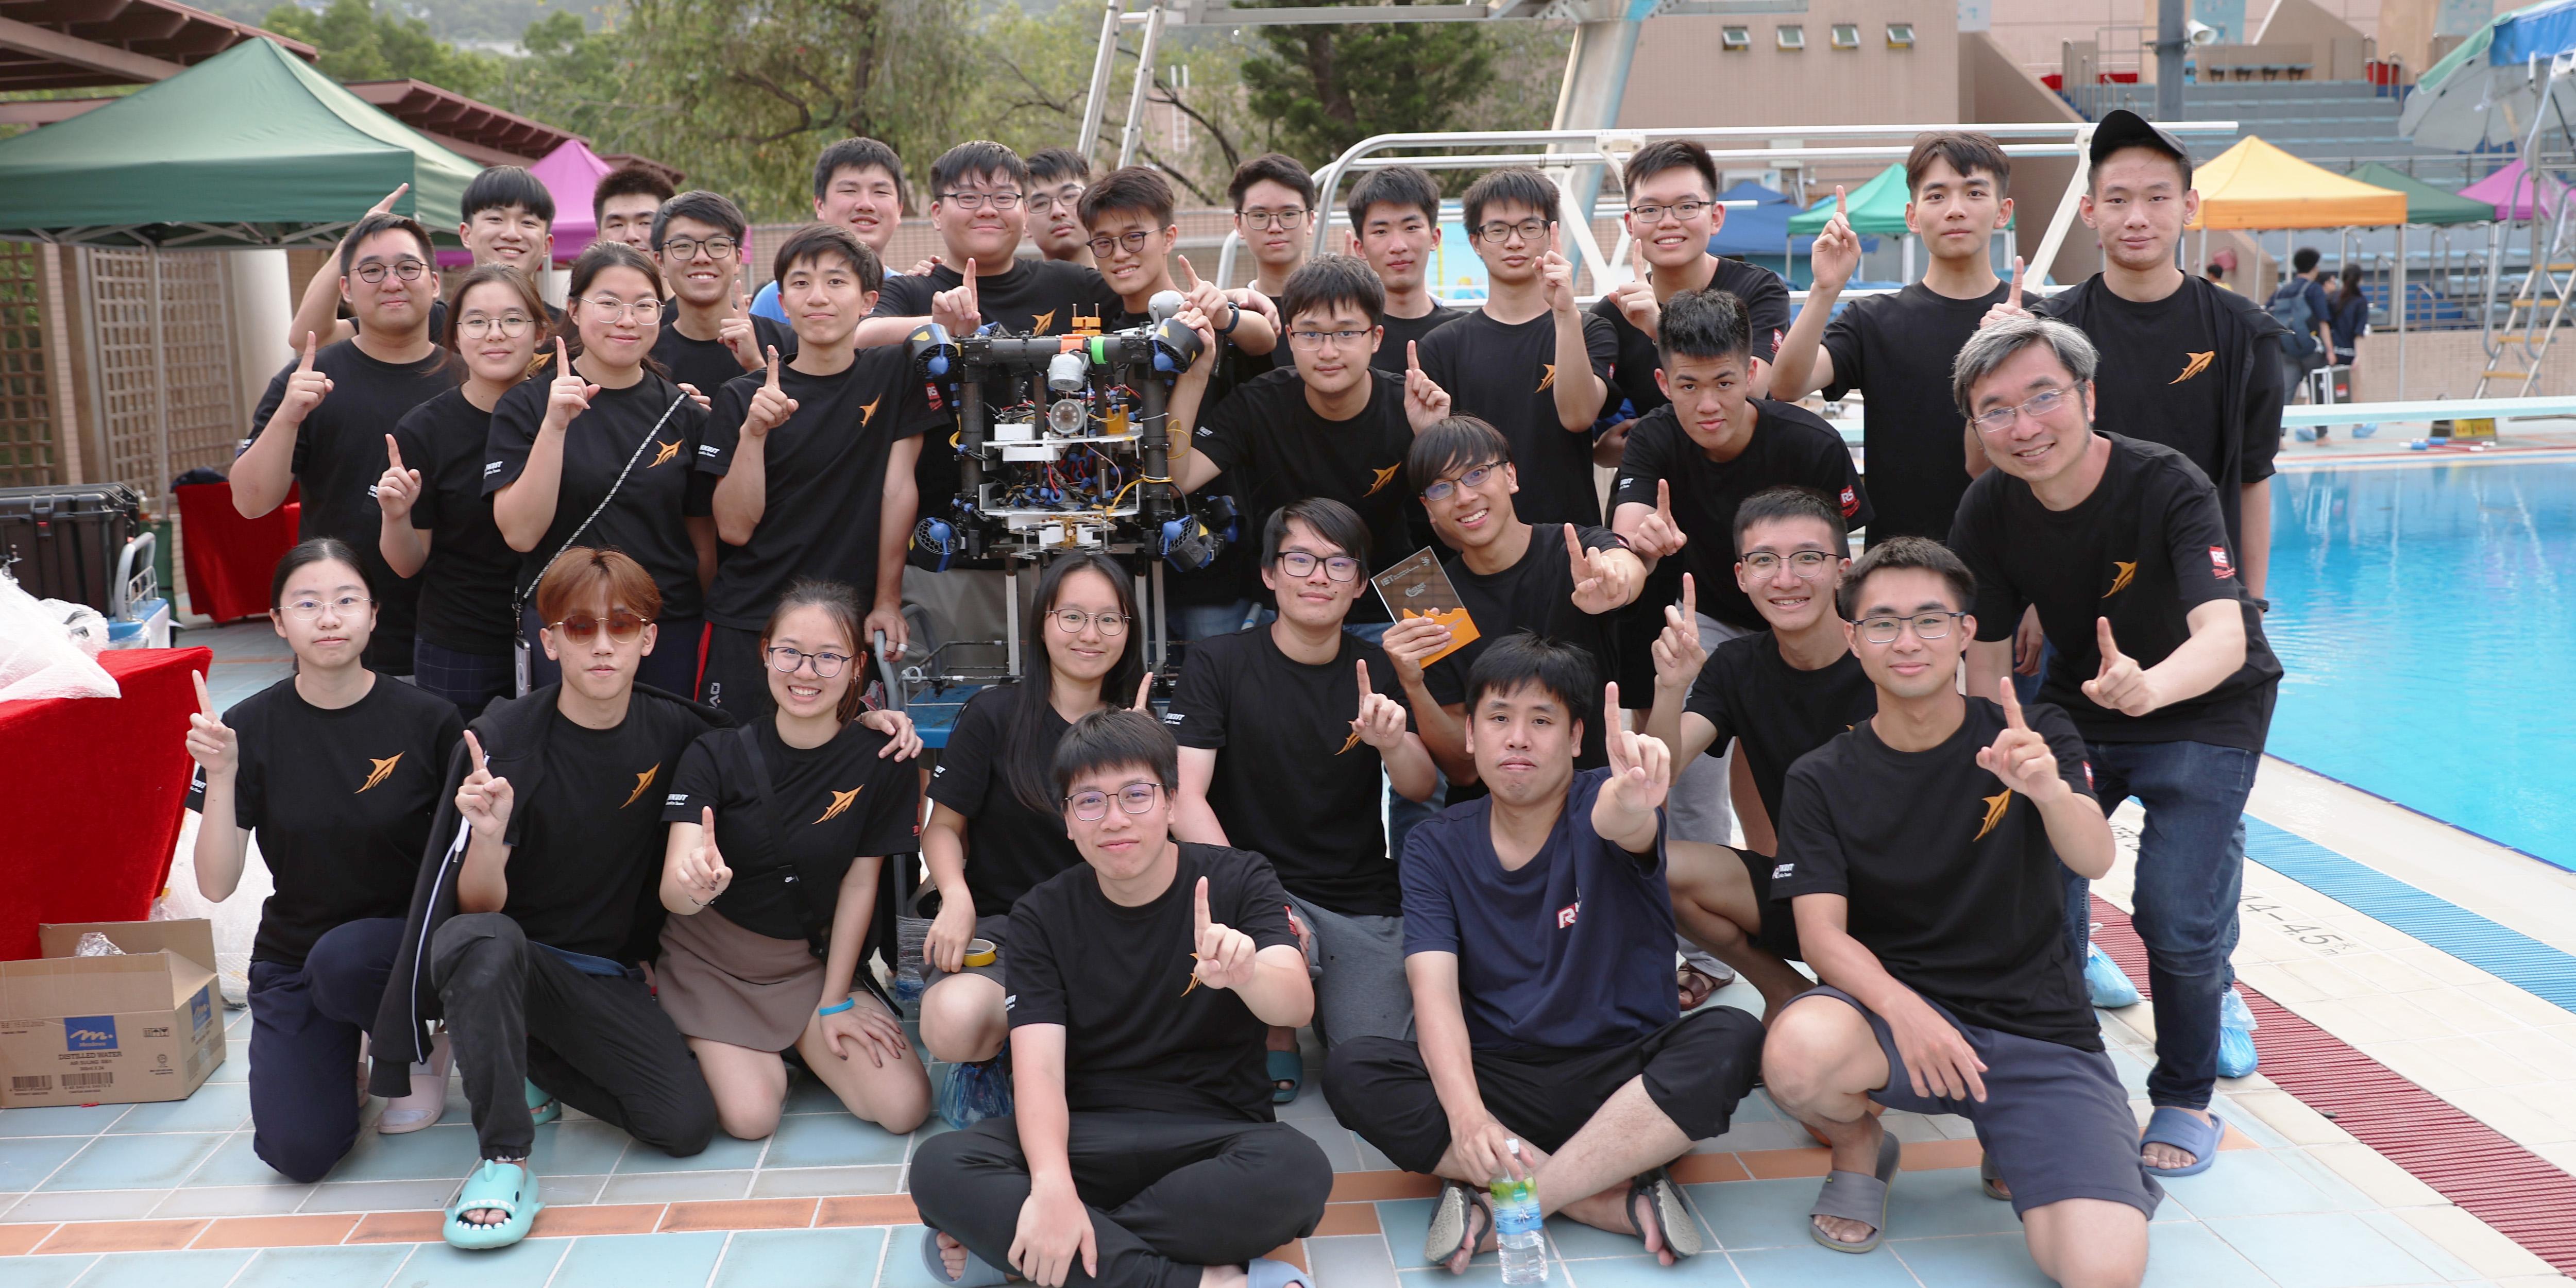 The HKUST ROV Team won their 11th championship in the Hong Kong Regional Contest of the MATE International ROV Competition since they joined in 2011. They will compete in the international competition in the US this June. 